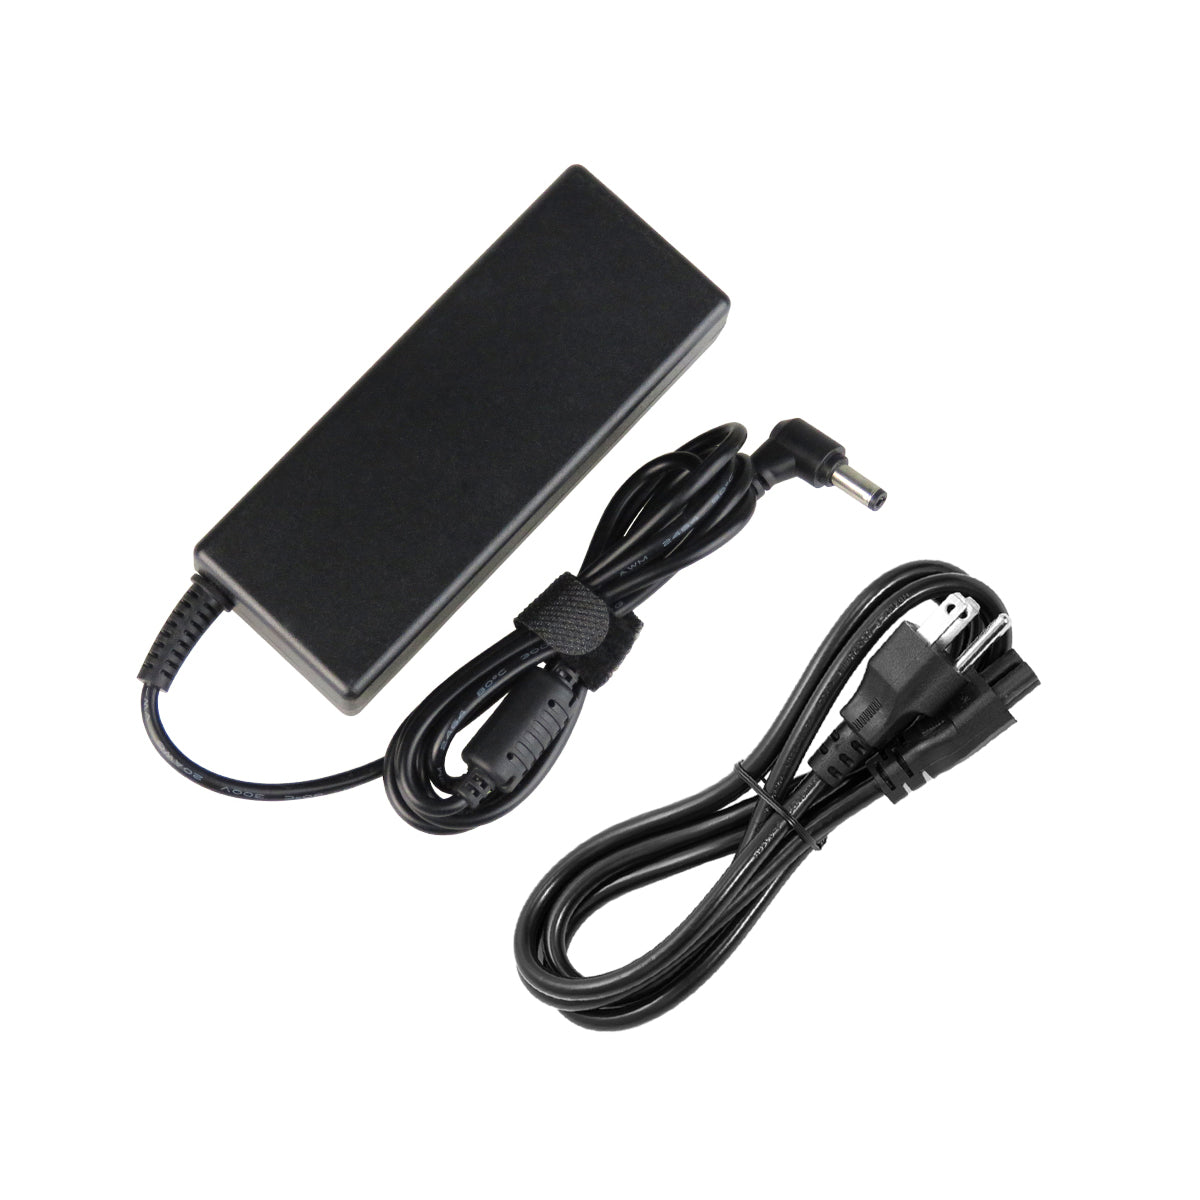 AC Adapter Charger for Toshiba Satellite c875d Notebook.